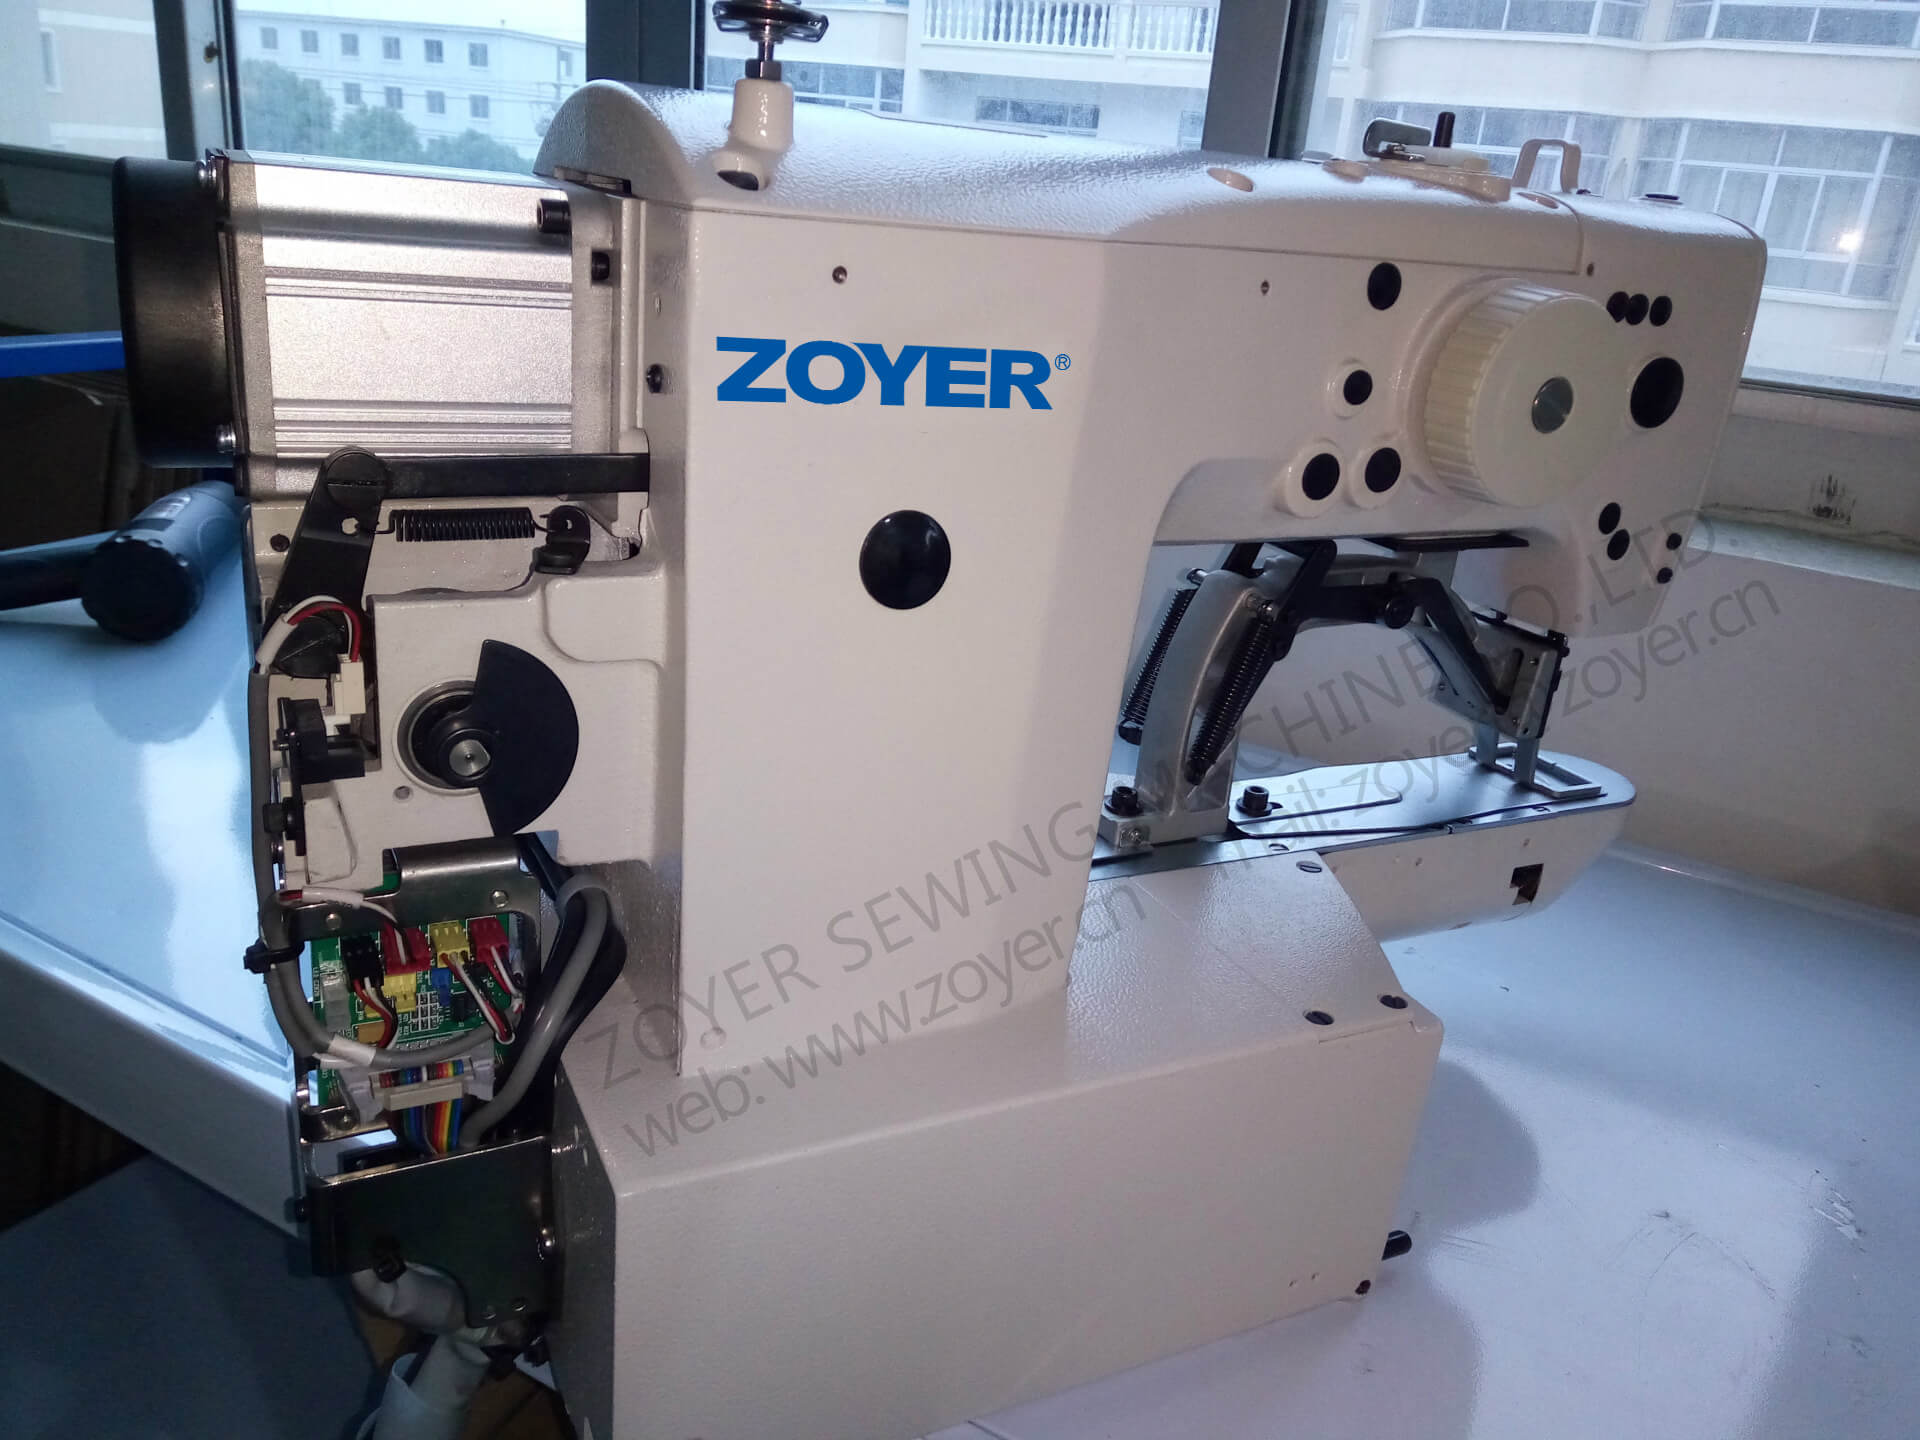 ZY1900A Zoyer Direct Drive Bar Attaccatrice per cucire